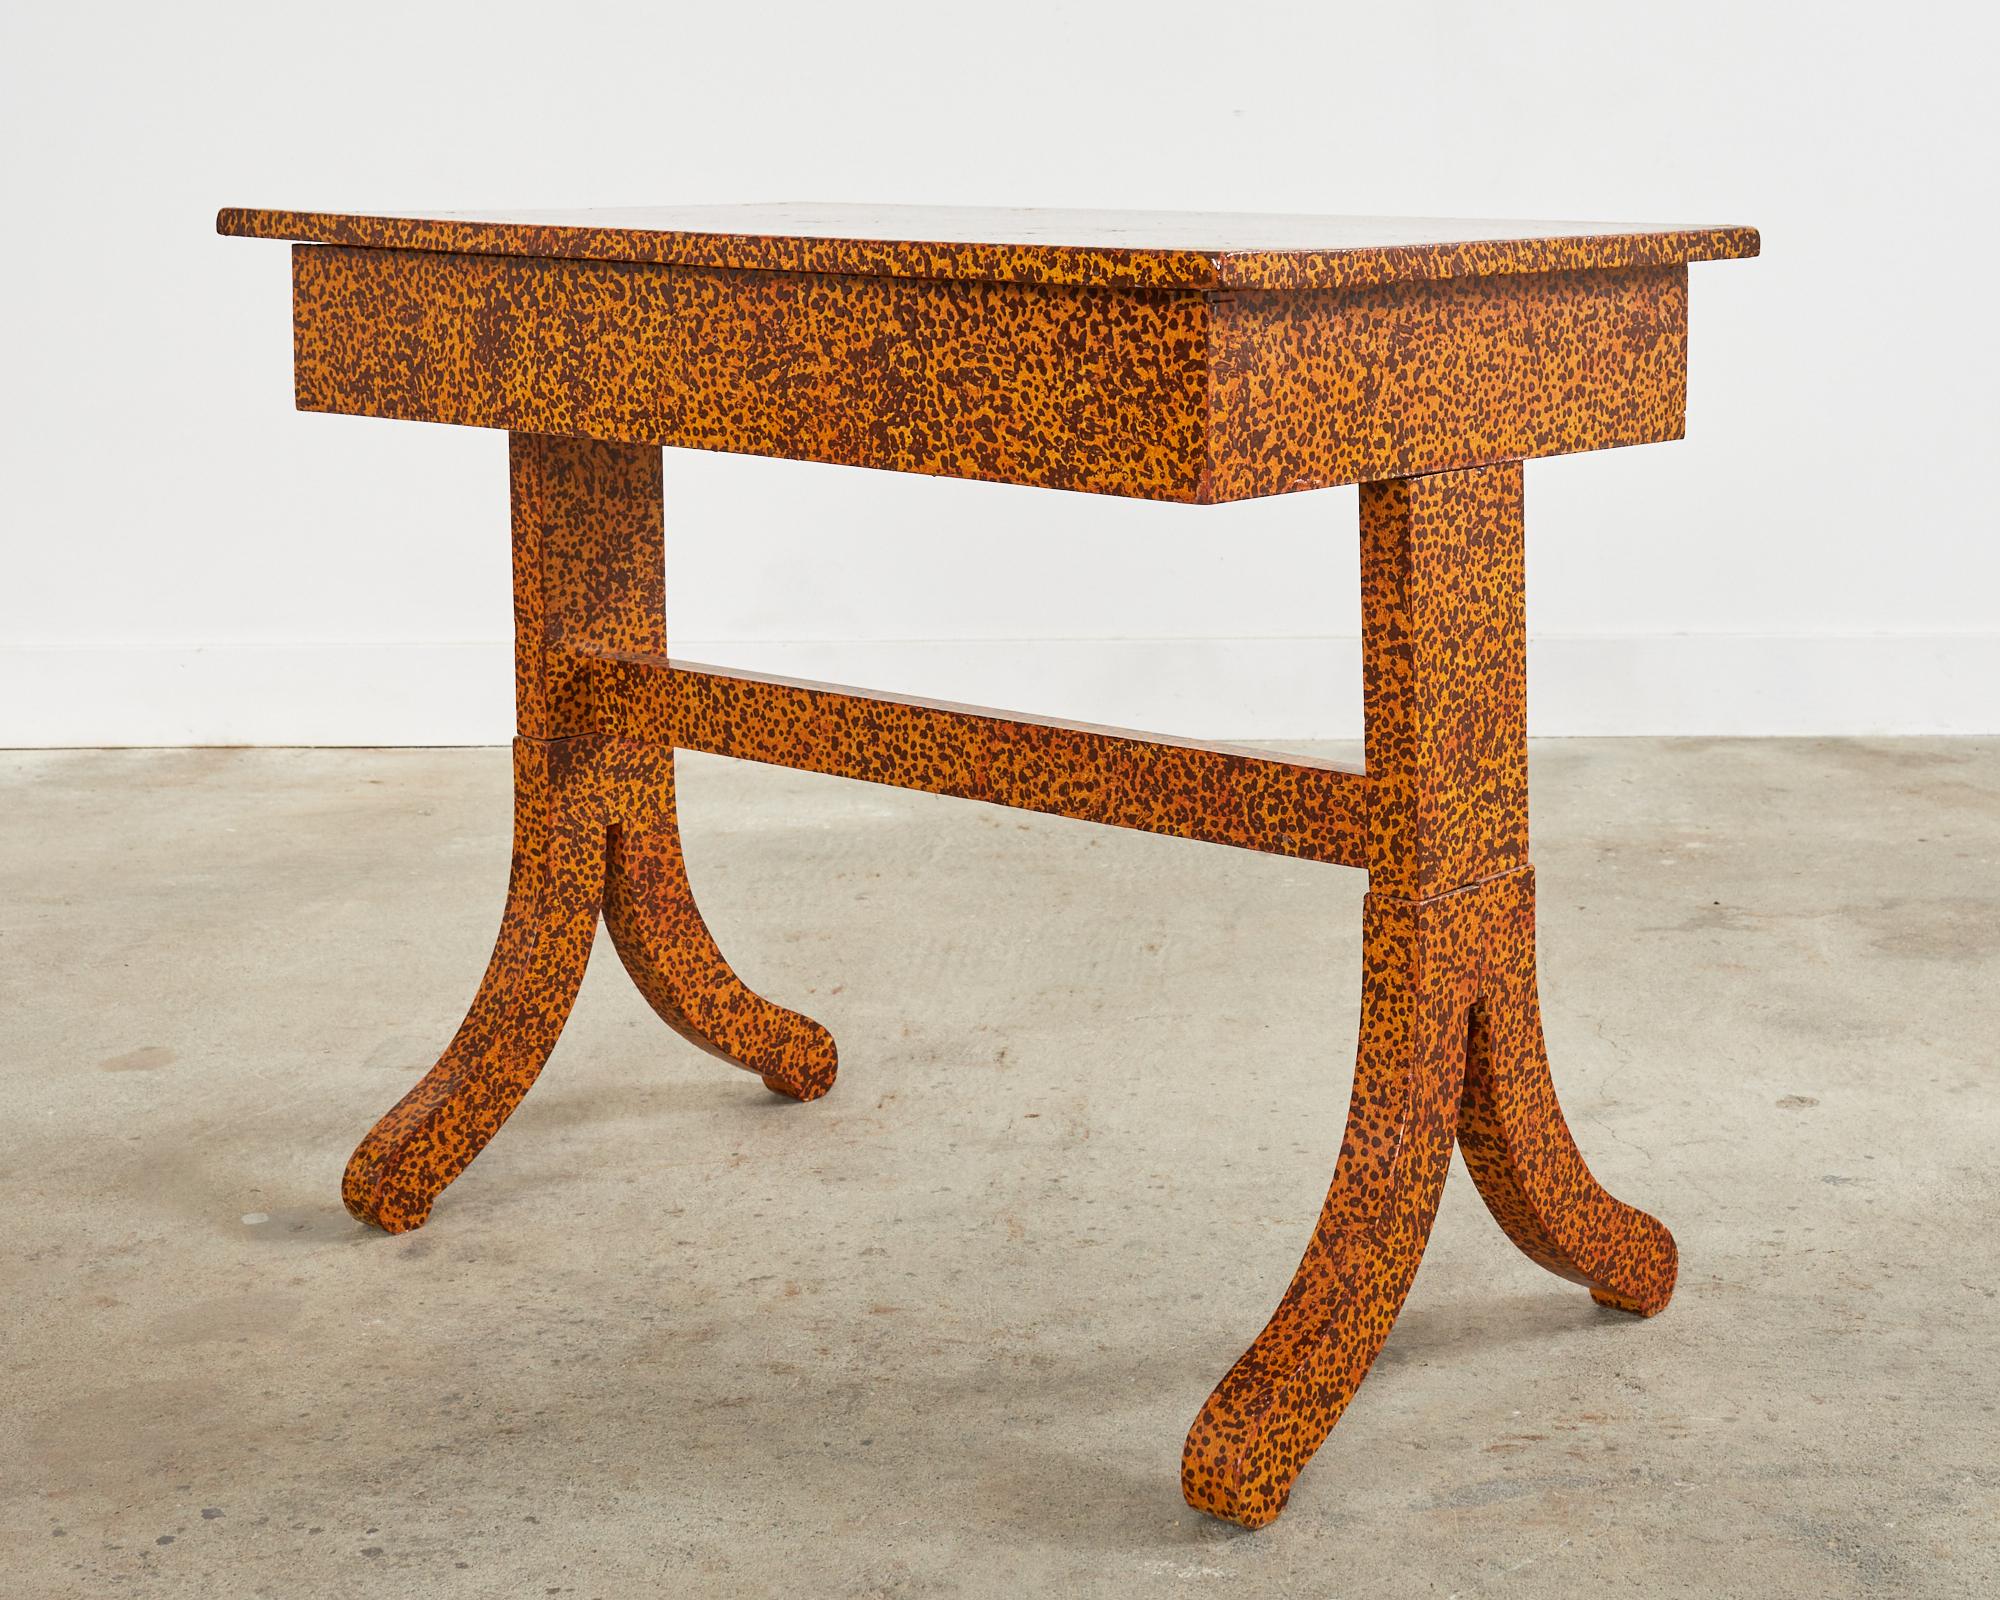 20th Century English Regency Style Table Lacquer Speckled by Artist Ira Yeager For Sale